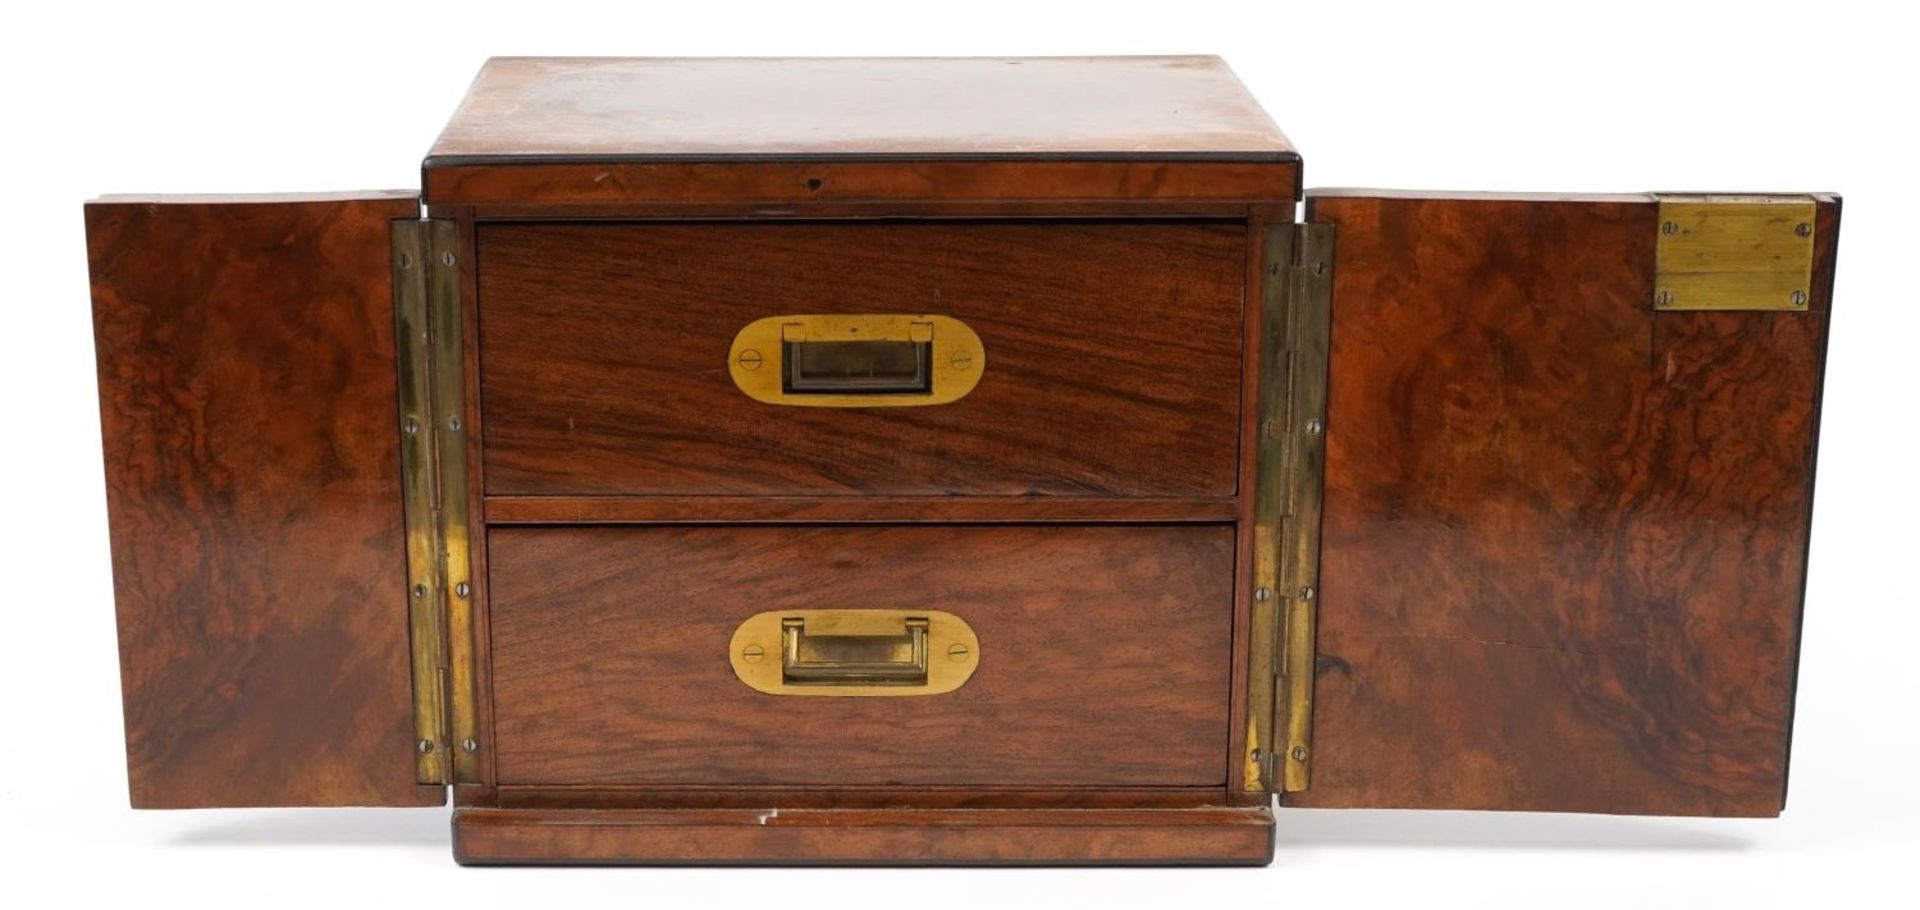 Victorian burr walnut campaign style cigar chest with opening front enclosing two drawers with inset - Image 2 of 4